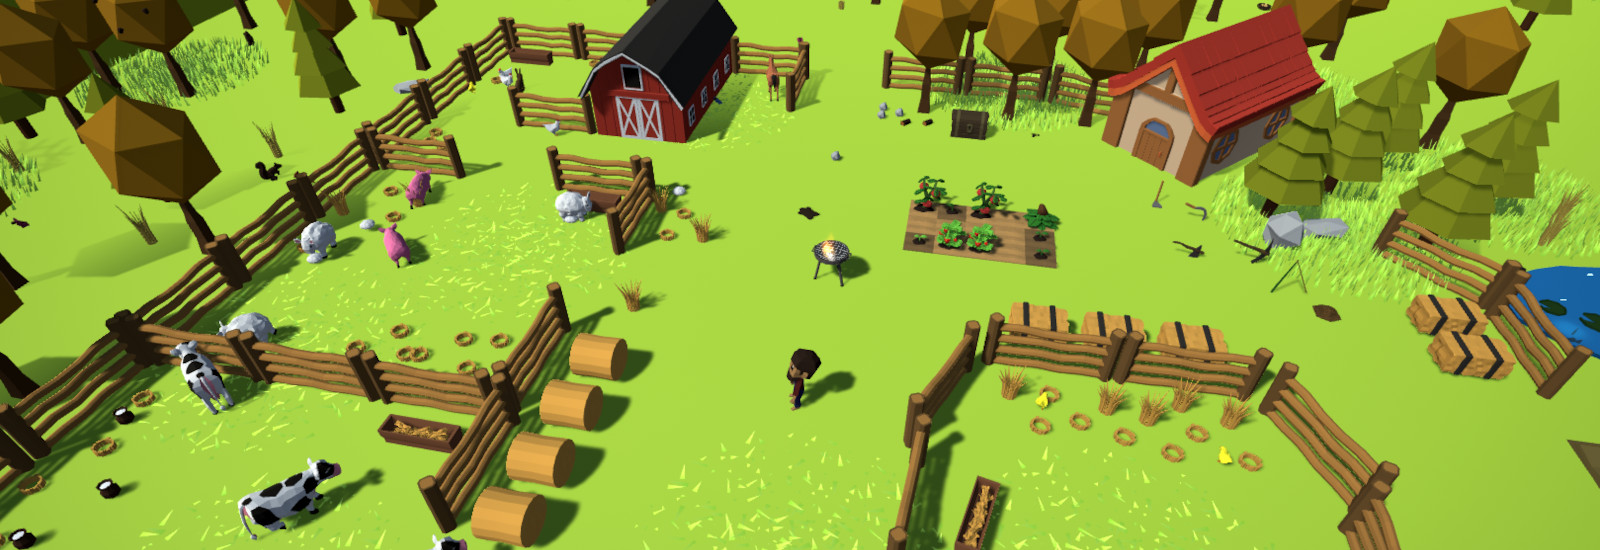 Farming Engine - Unity Asset by Indie Marc